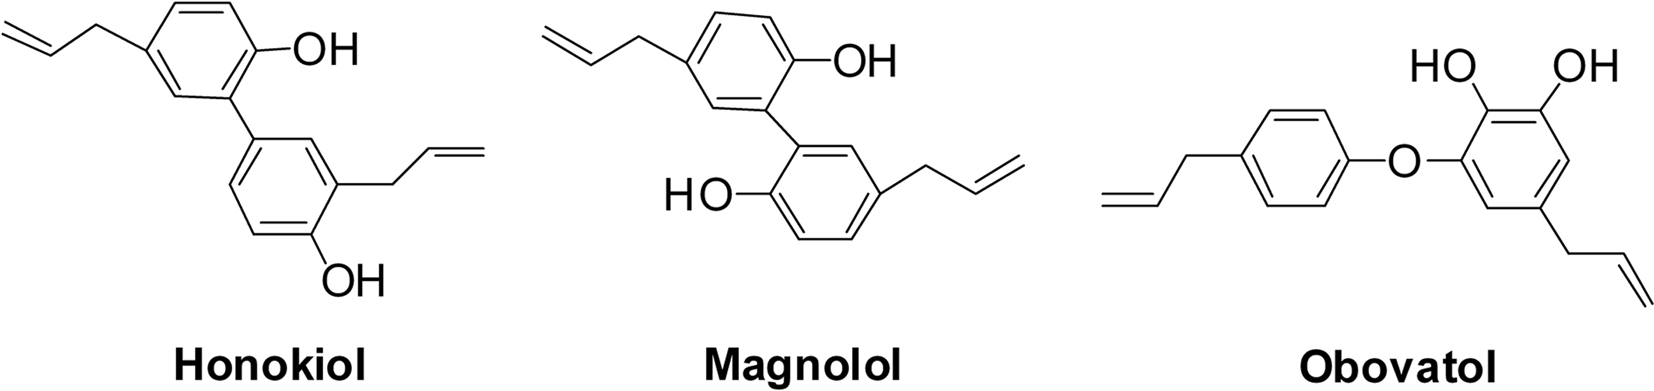 Chemical structures of honokiol, magnolol and obovatol.